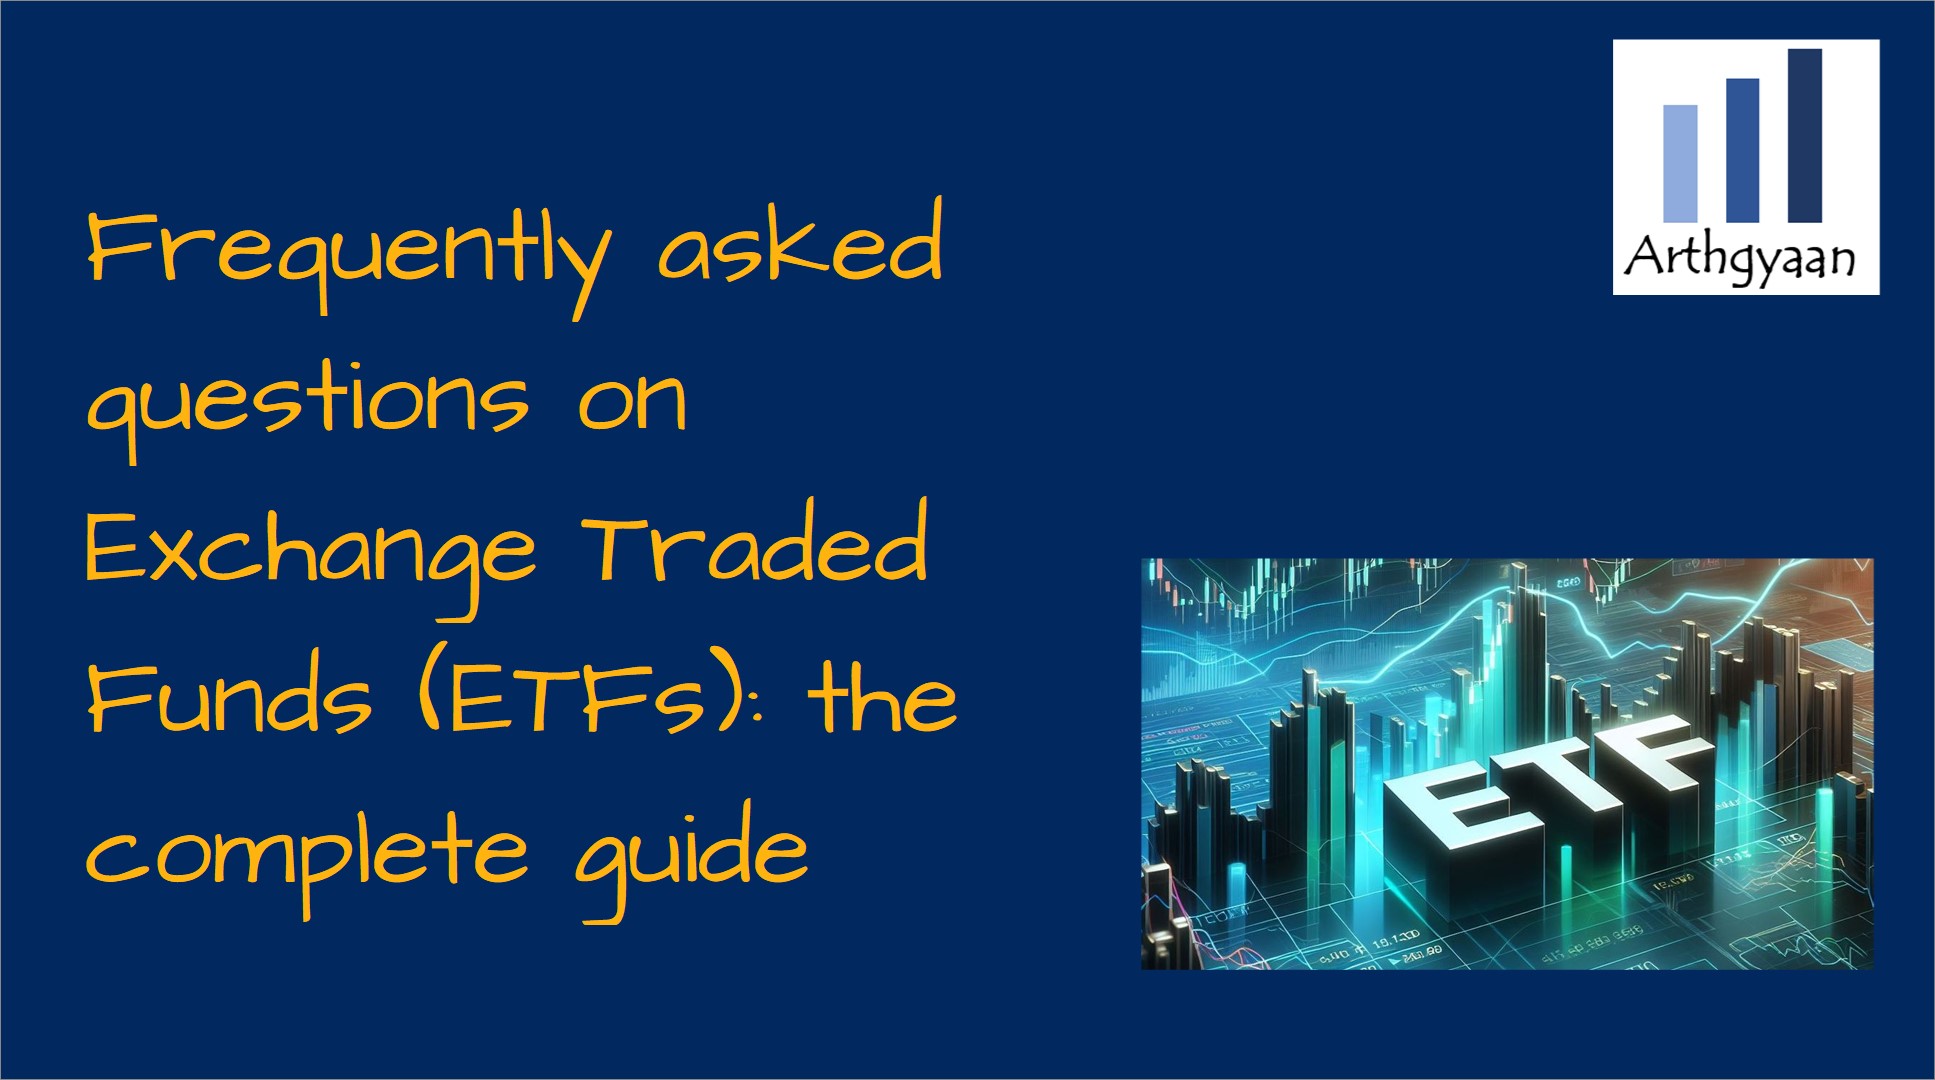 Frequently asked questions on Exchange Traded Funds (ETFs): the complete guide